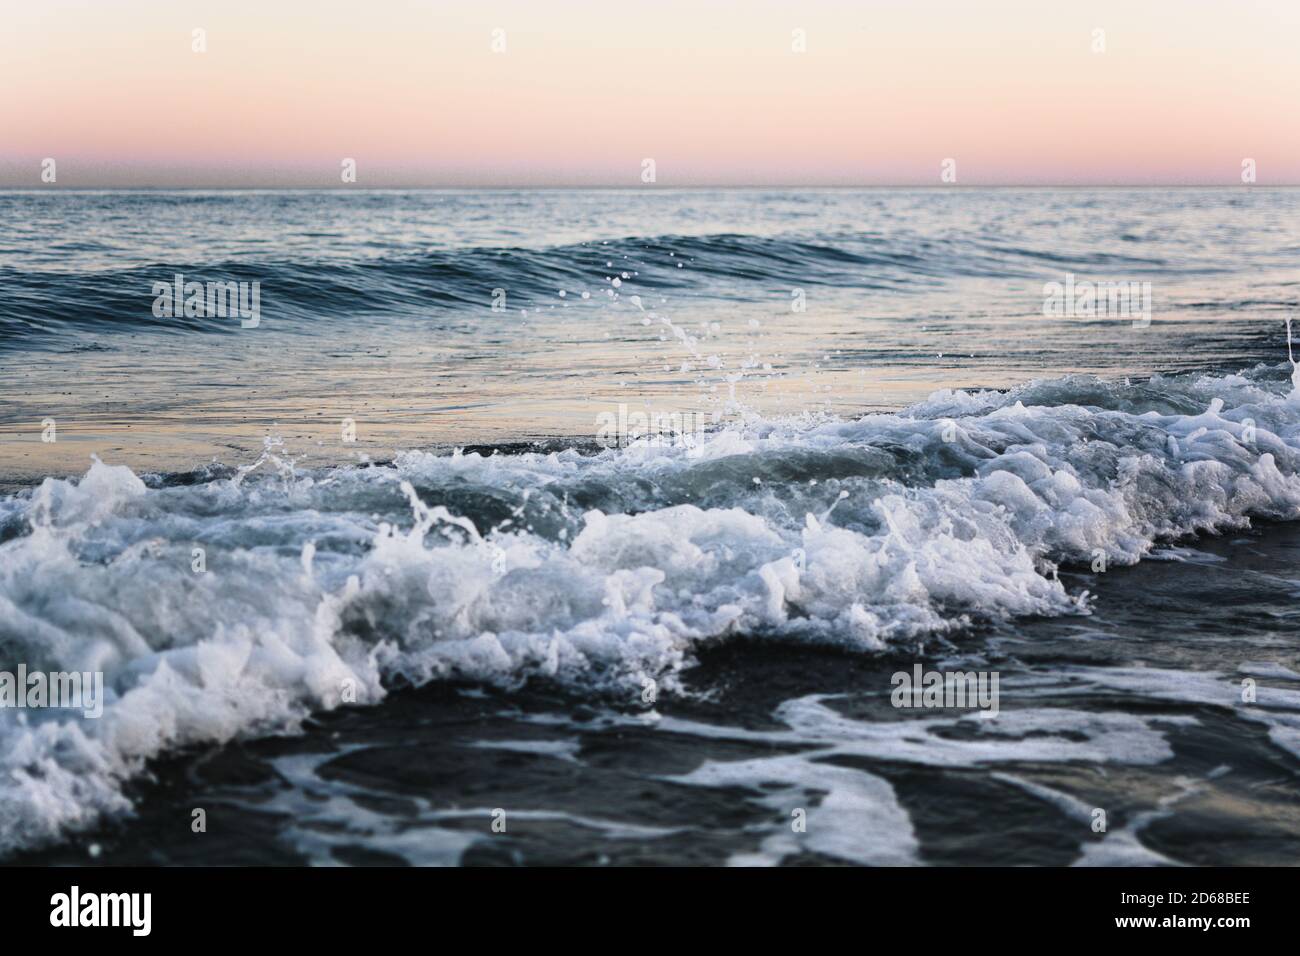 Sea beach water with waves. Stock Photo